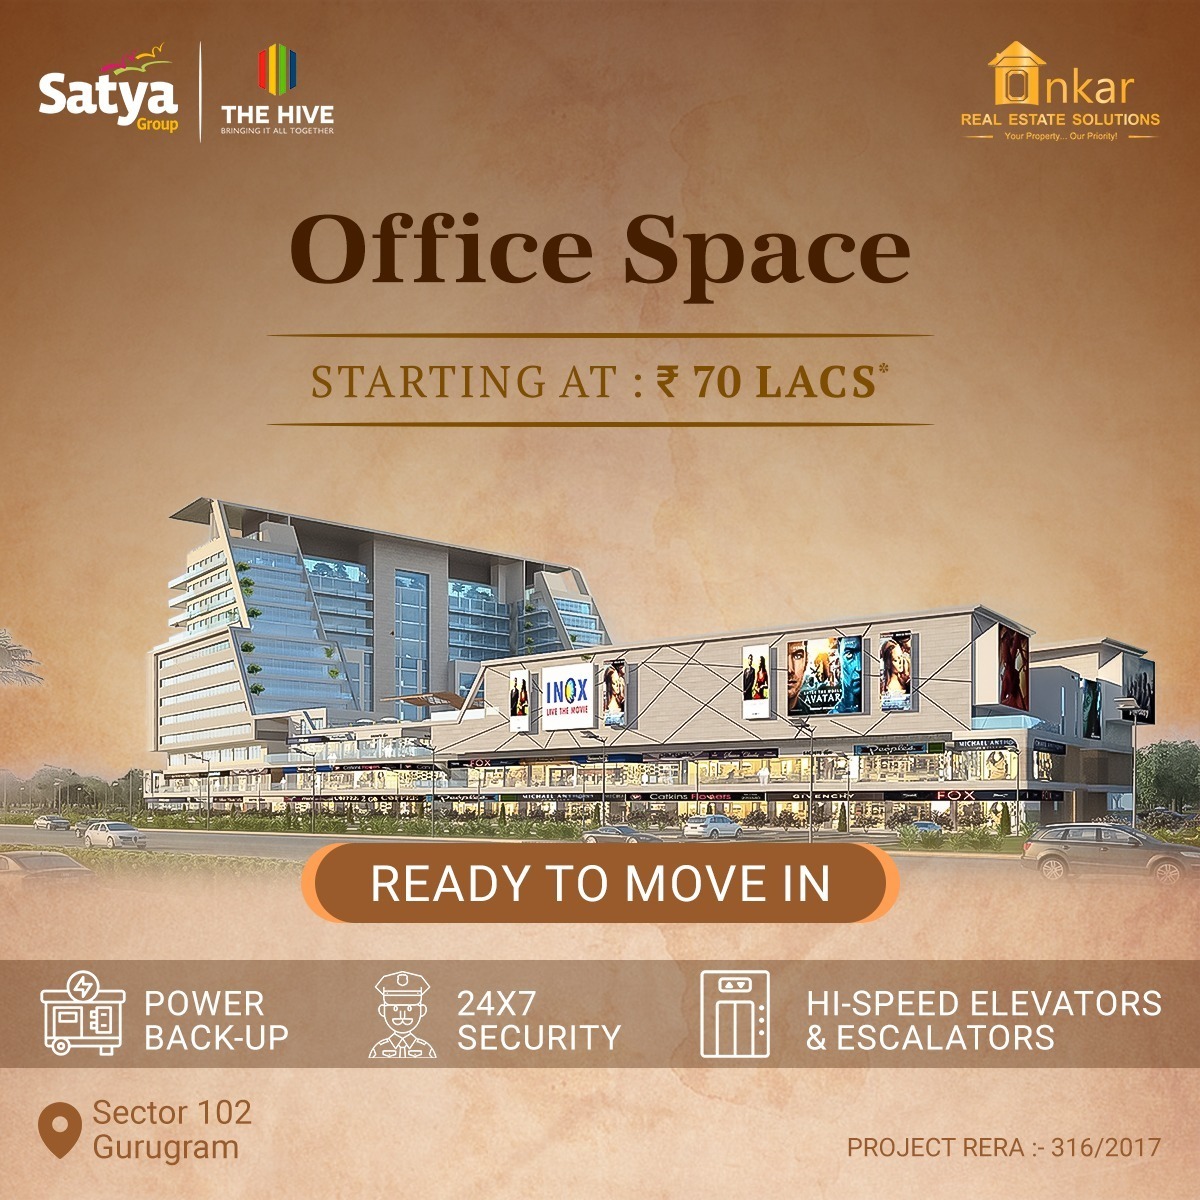 Step into success at #SatyaHive, Sector 102 Gurugram! Elevate your business to new heights with our ready-to-move-in office spaces. 

Contact Us: +91-8588808484 
Visit Us: satyathehivegurgaon.com  

#InvestmentProperty #RealEstate #commercialproperty #OnkarRealEstateSolutions